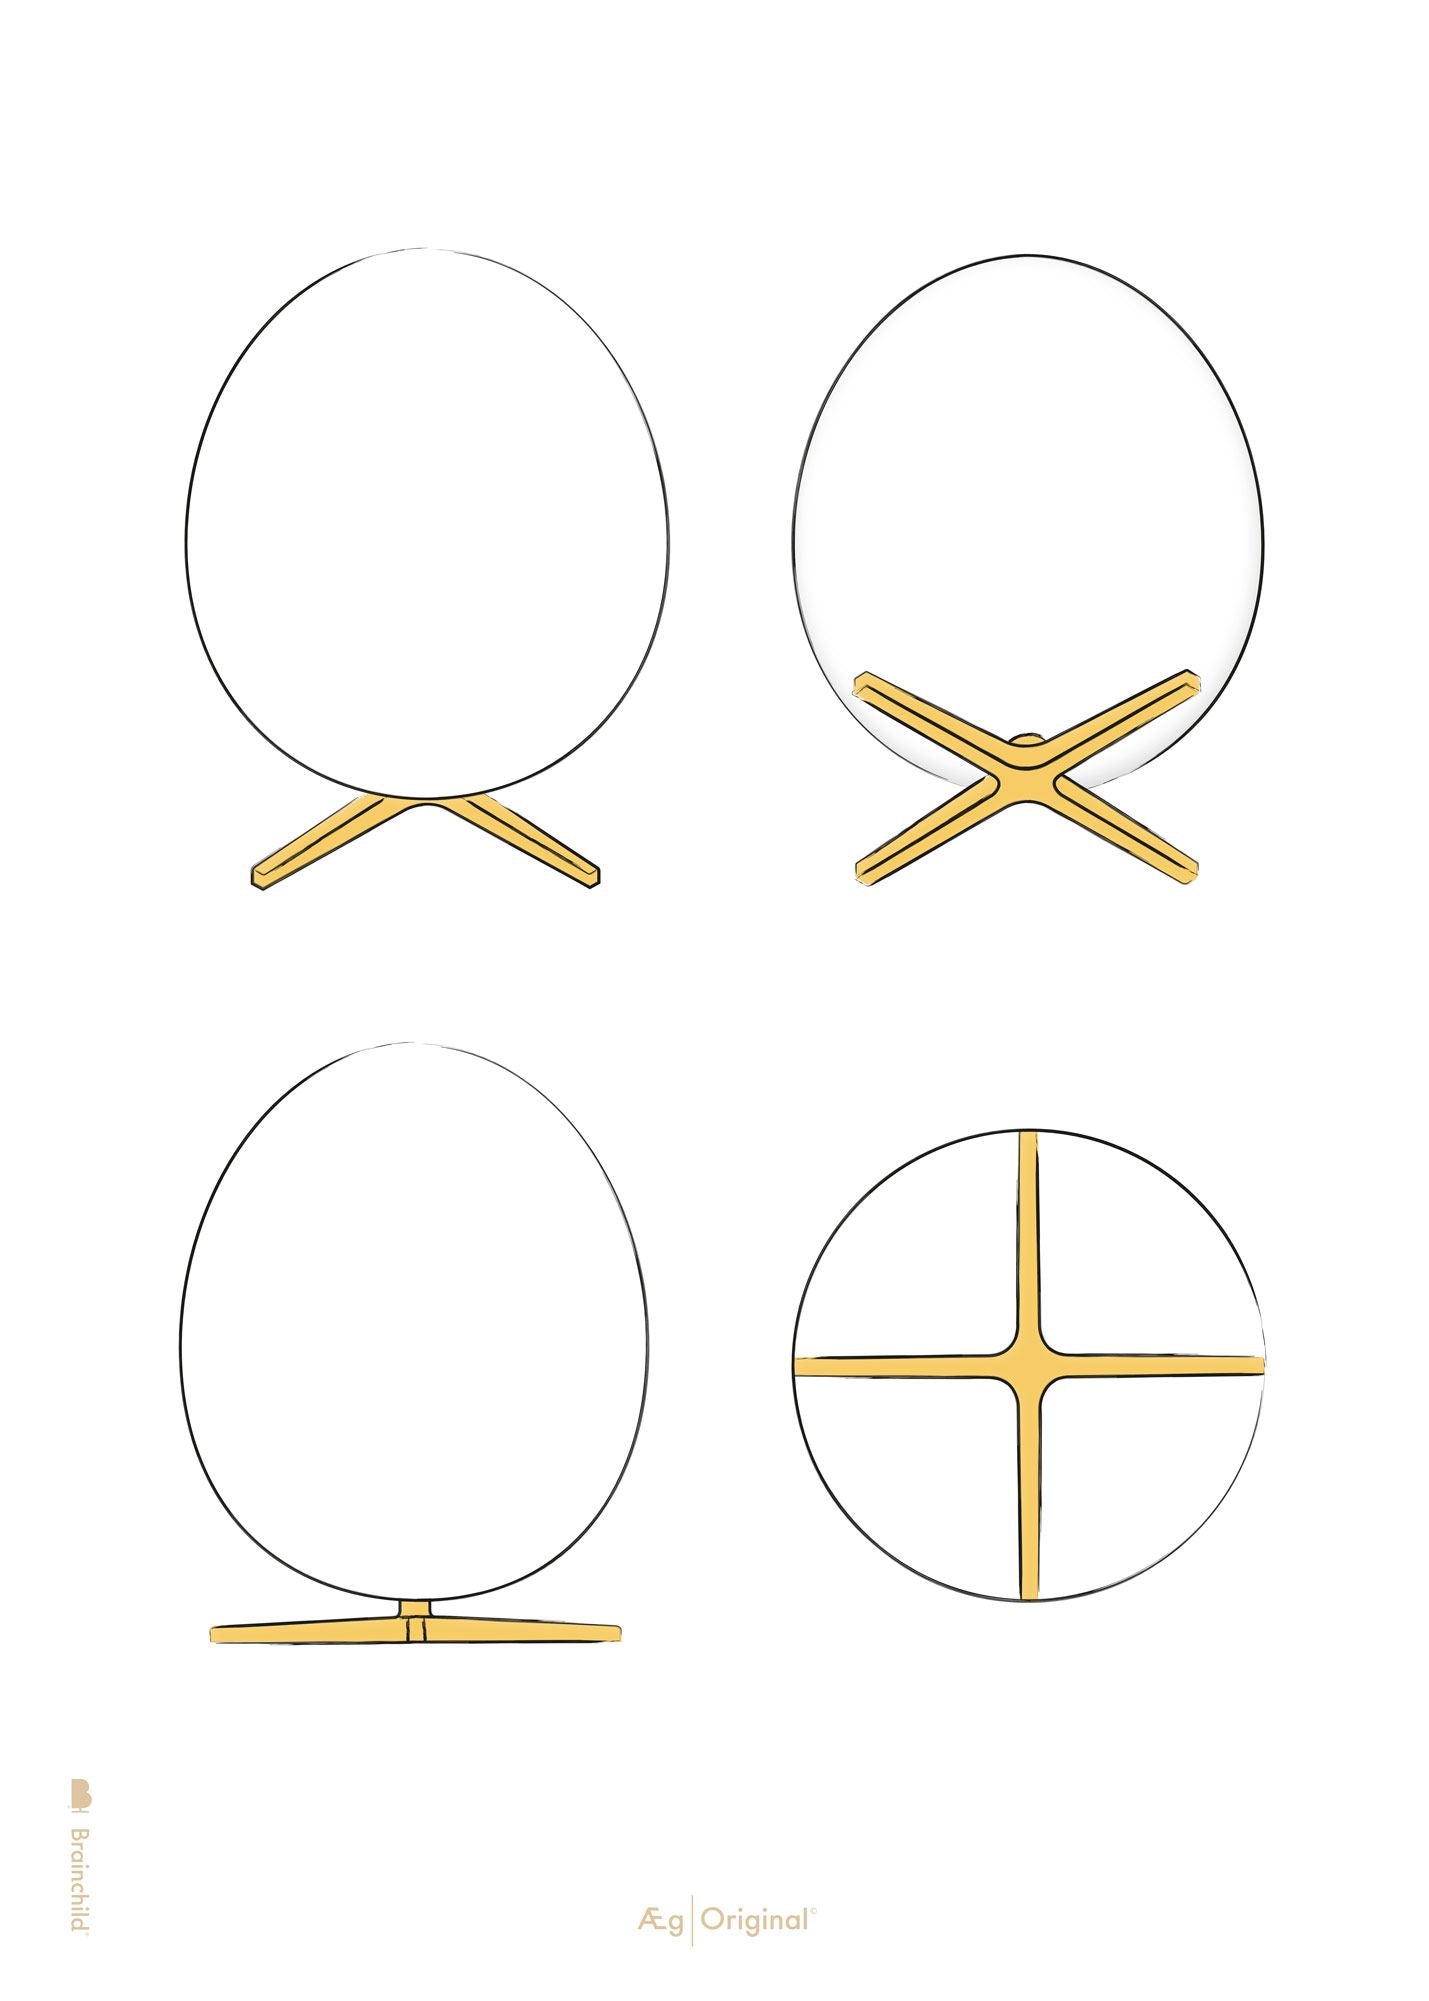 Brainchild The Egg Design Sketches Poster Without Frame 50x70 Cm, White Background